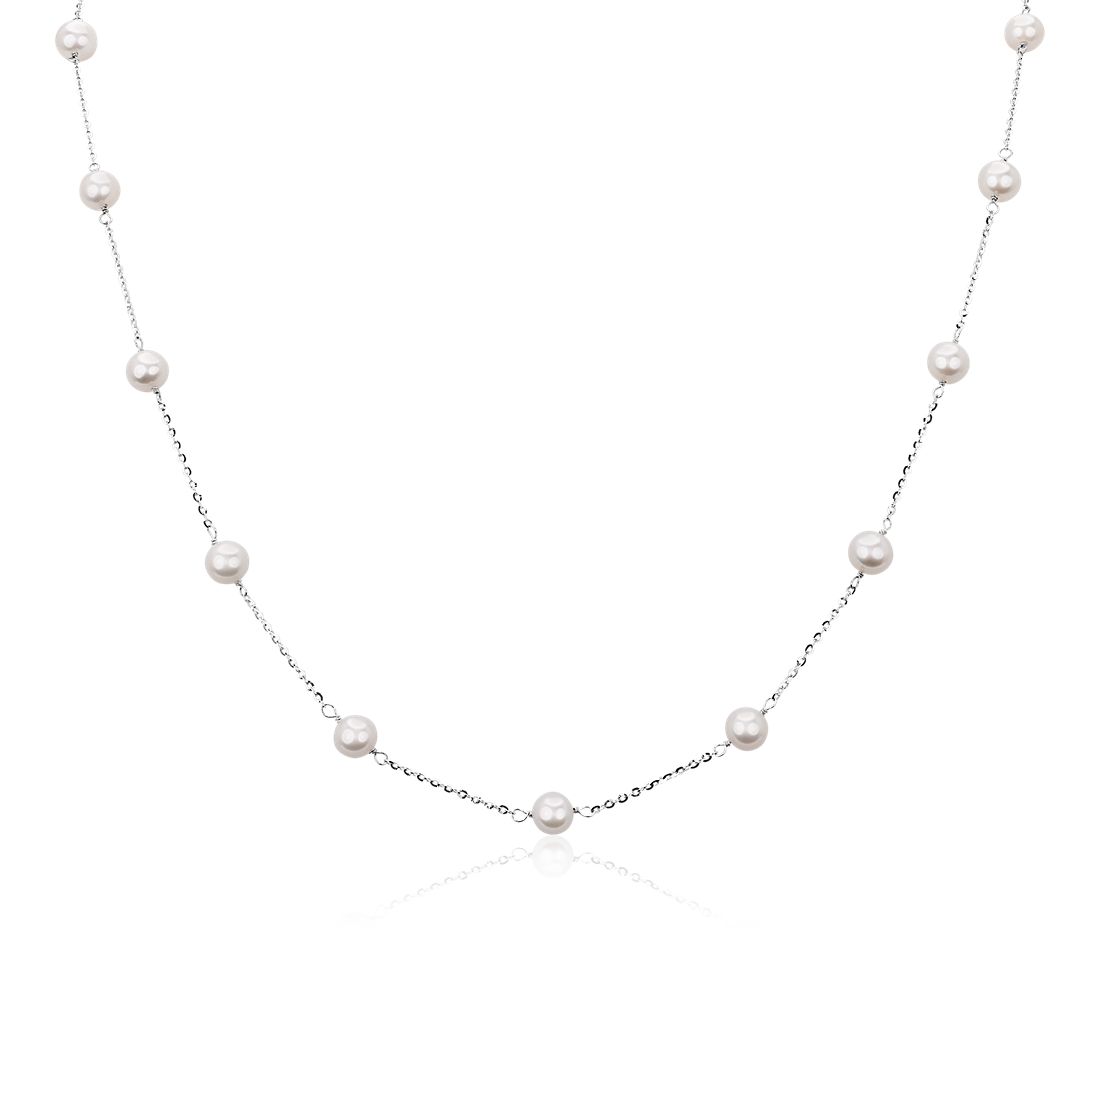 Freshwater Pearl Stationed Necklace in Sterling Silver